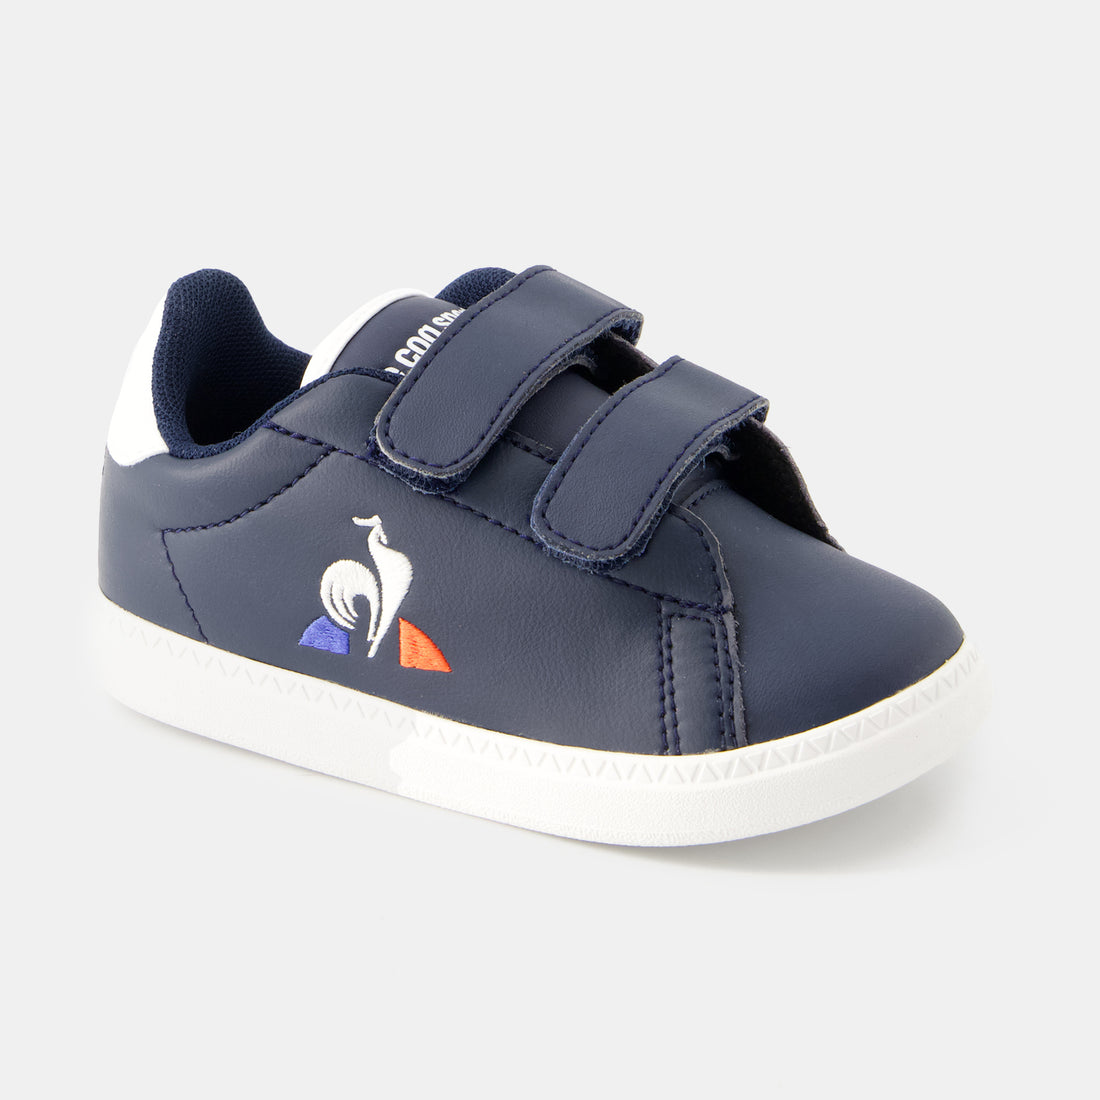 2410728-COURTSET_2 INF dress blue/optical white | Chaussures COURTSET_2 INF Enfant